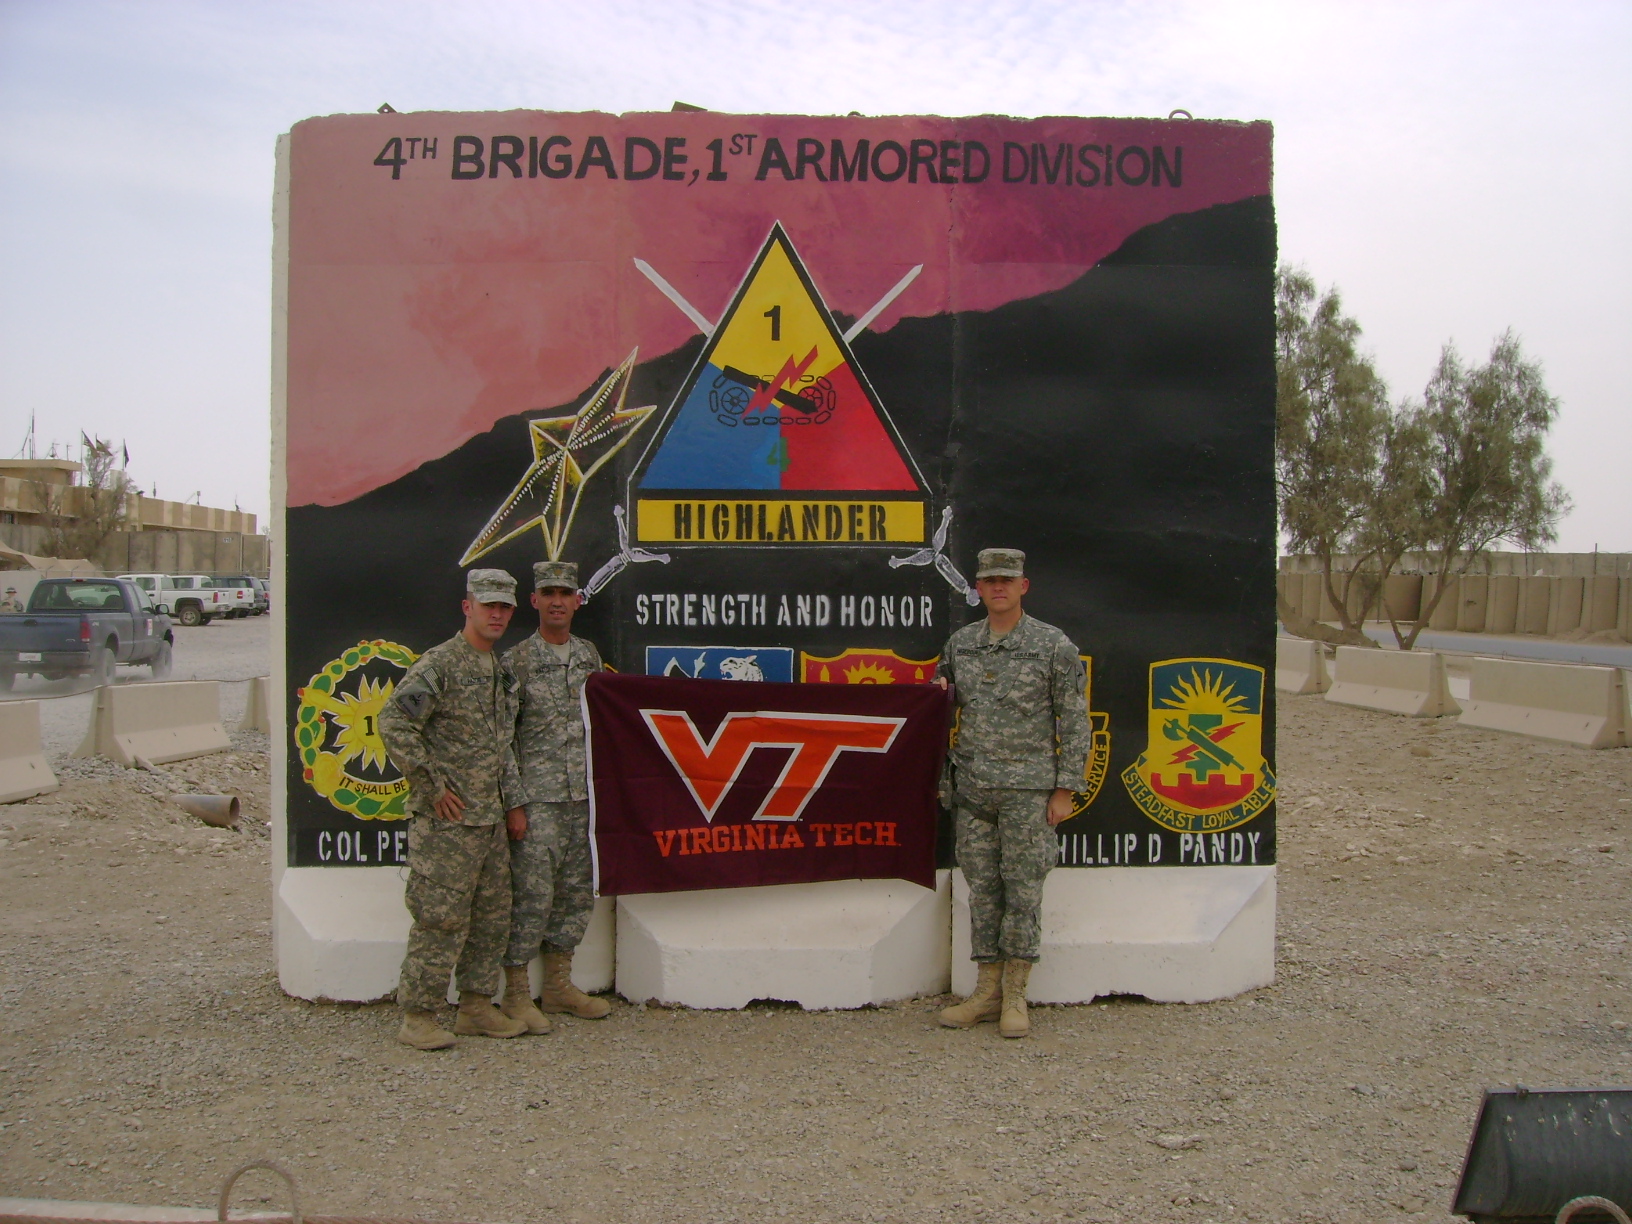 Hogeboom (right) with brothers 1st Lt. Antonio Pazos, member of Virginia Tech Corps of Cadets Class of 2007 who majored in civil engineering in the College of Engineering (left), and Maj. Rafael Pazos, member of Virginia Tech Corps of Cadets Class of 1993 who majored in mechanical engineering also in the College of Engineering (center) pictured outside the 4th Brigade Combat Team, 1st Armored Division Headquarters, COB Adder, Iraq.